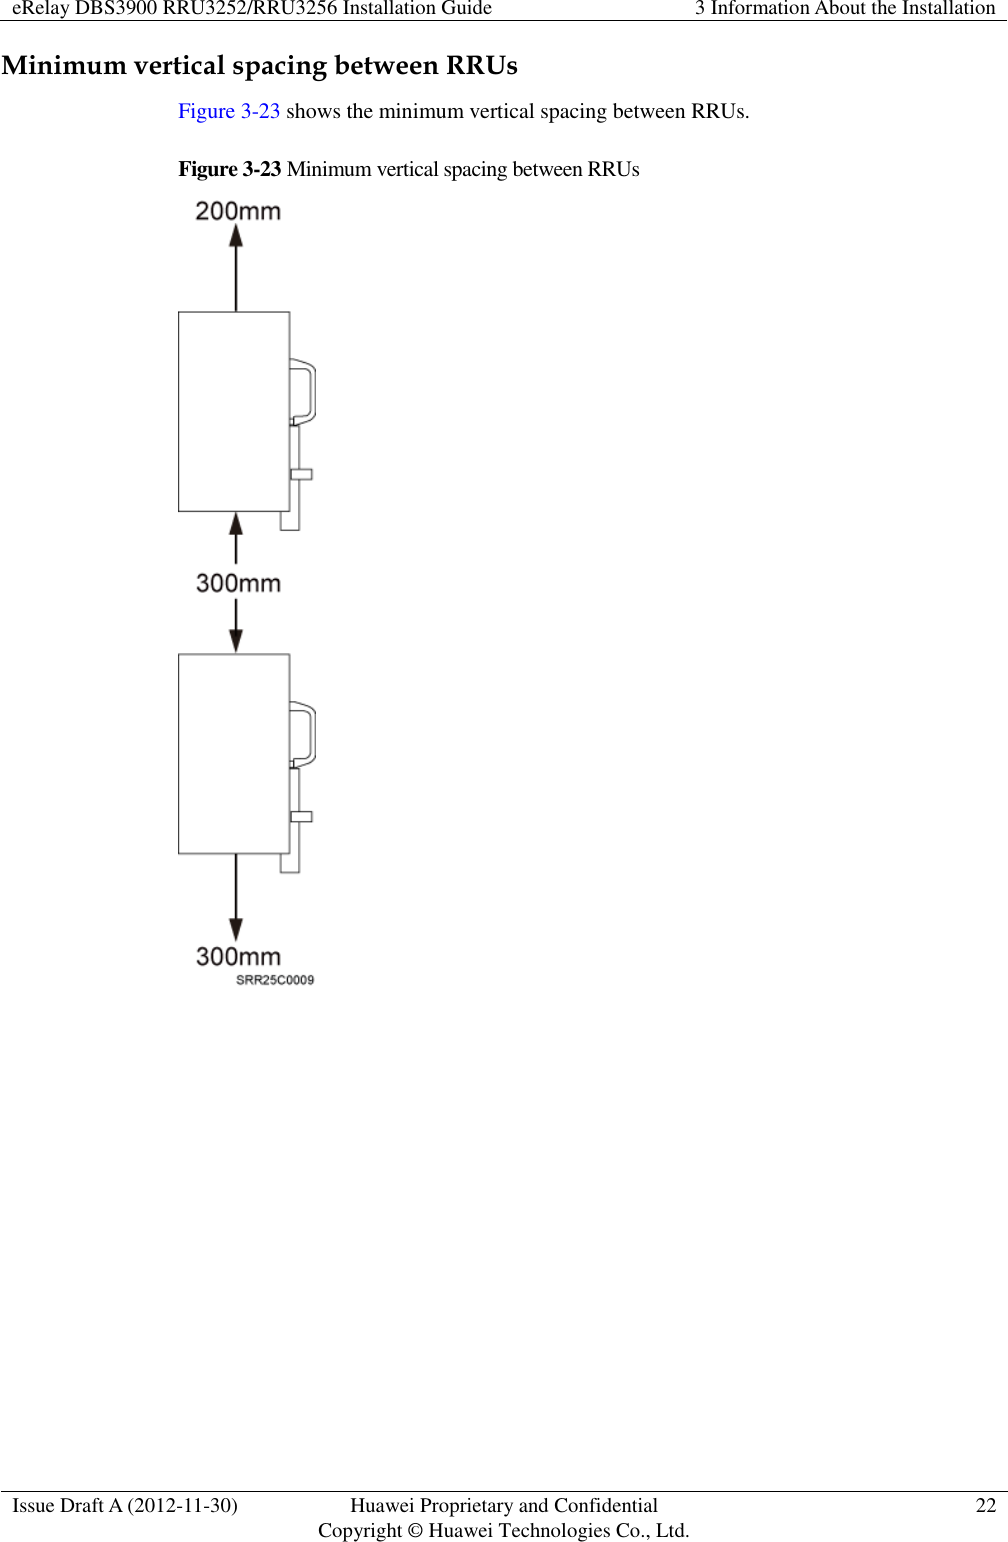 eRelay DBS3900 RRU3252/RRU3256 Installation Guide 3 Information About the Installation  Issue Draft A (2012-11-30) Huawei Proprietary and Confidential                                     Copyright © Huawei Technologies Co., Ltd. 22  Minimum vertical spacing between RRUs Figure 3-23 shows the minimum vertical spacing between RRUs. Figure 3-23 Minimum vertical spacing between RRUs  